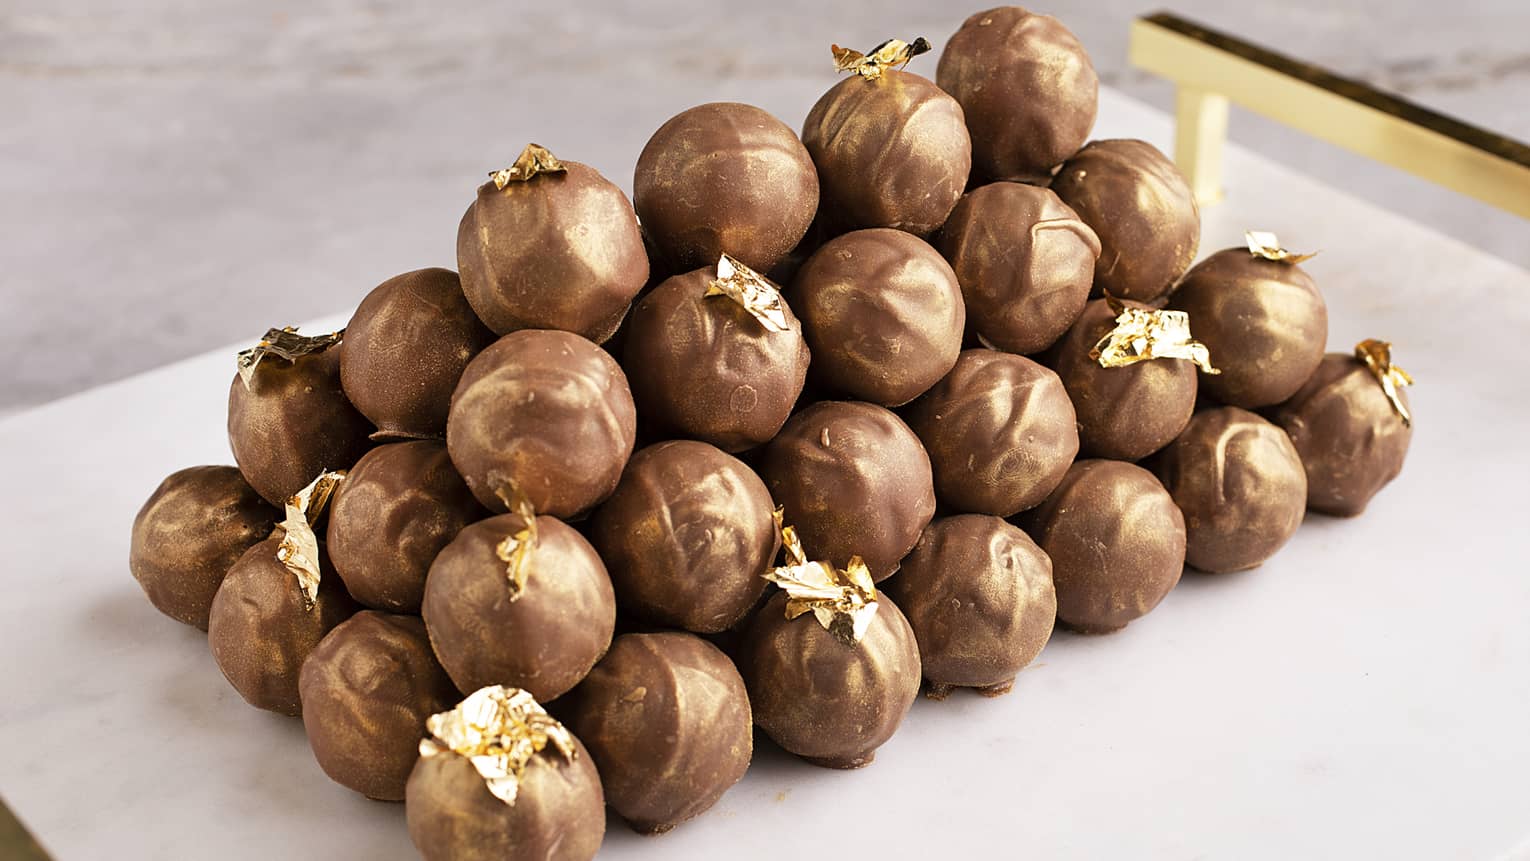  Turkish coffee truffles featuring a gold-covered dark chocolate shell, Turkish coffee ganache and gold sheet